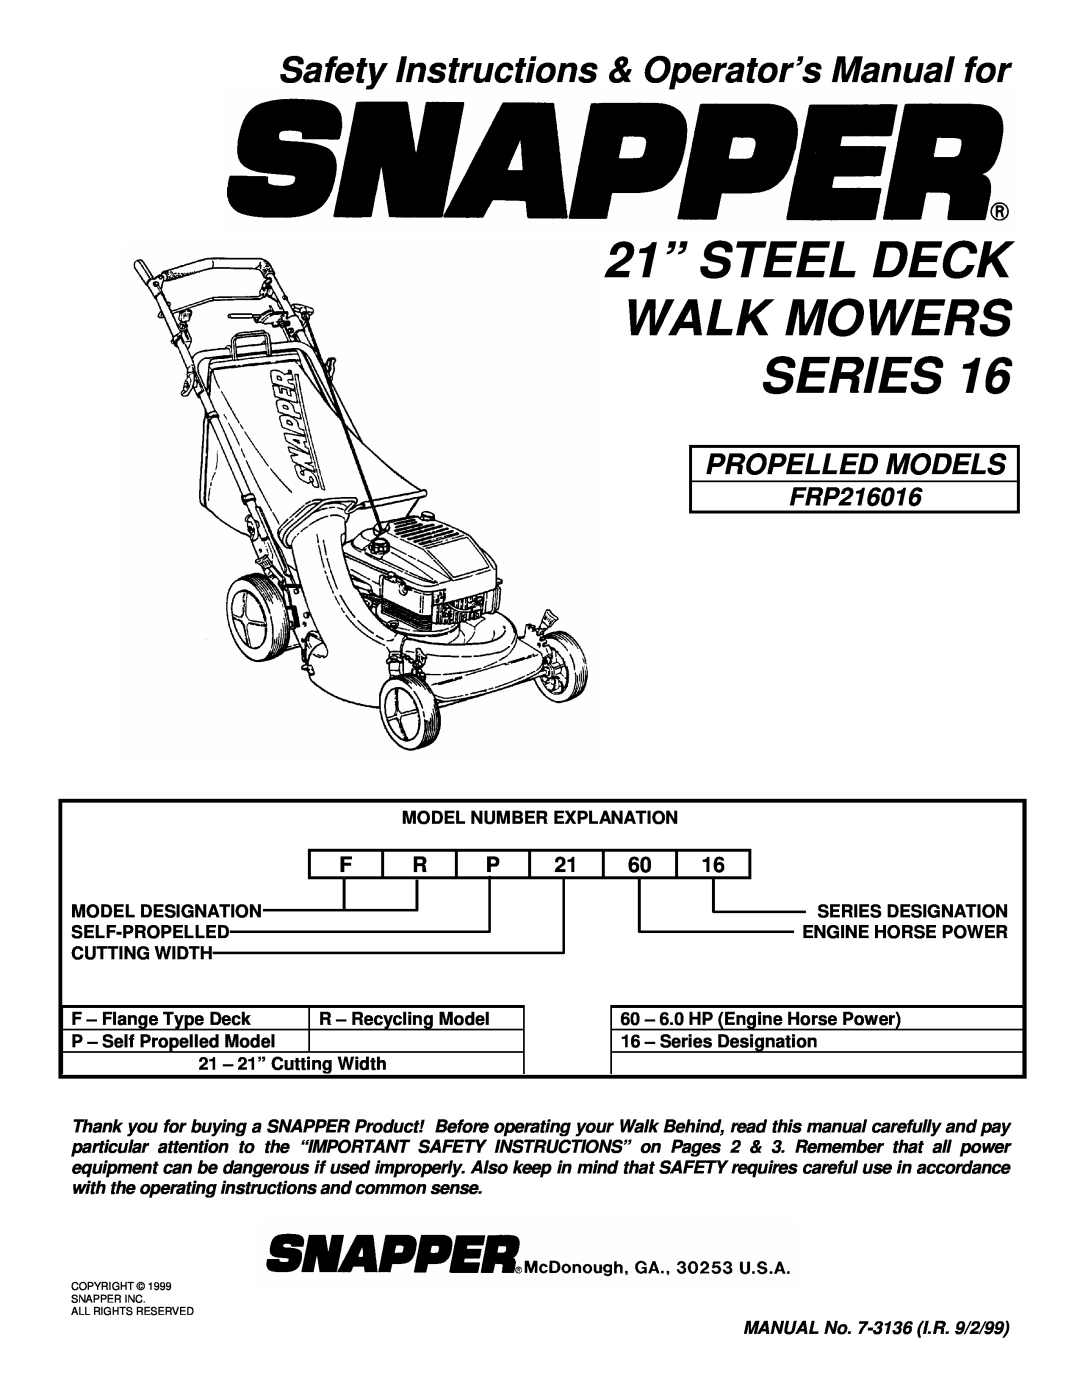 Snapper FRP216016 important safety instructions 21” STEEL DECK WALK MOWERS SERIES, Propelled Models 